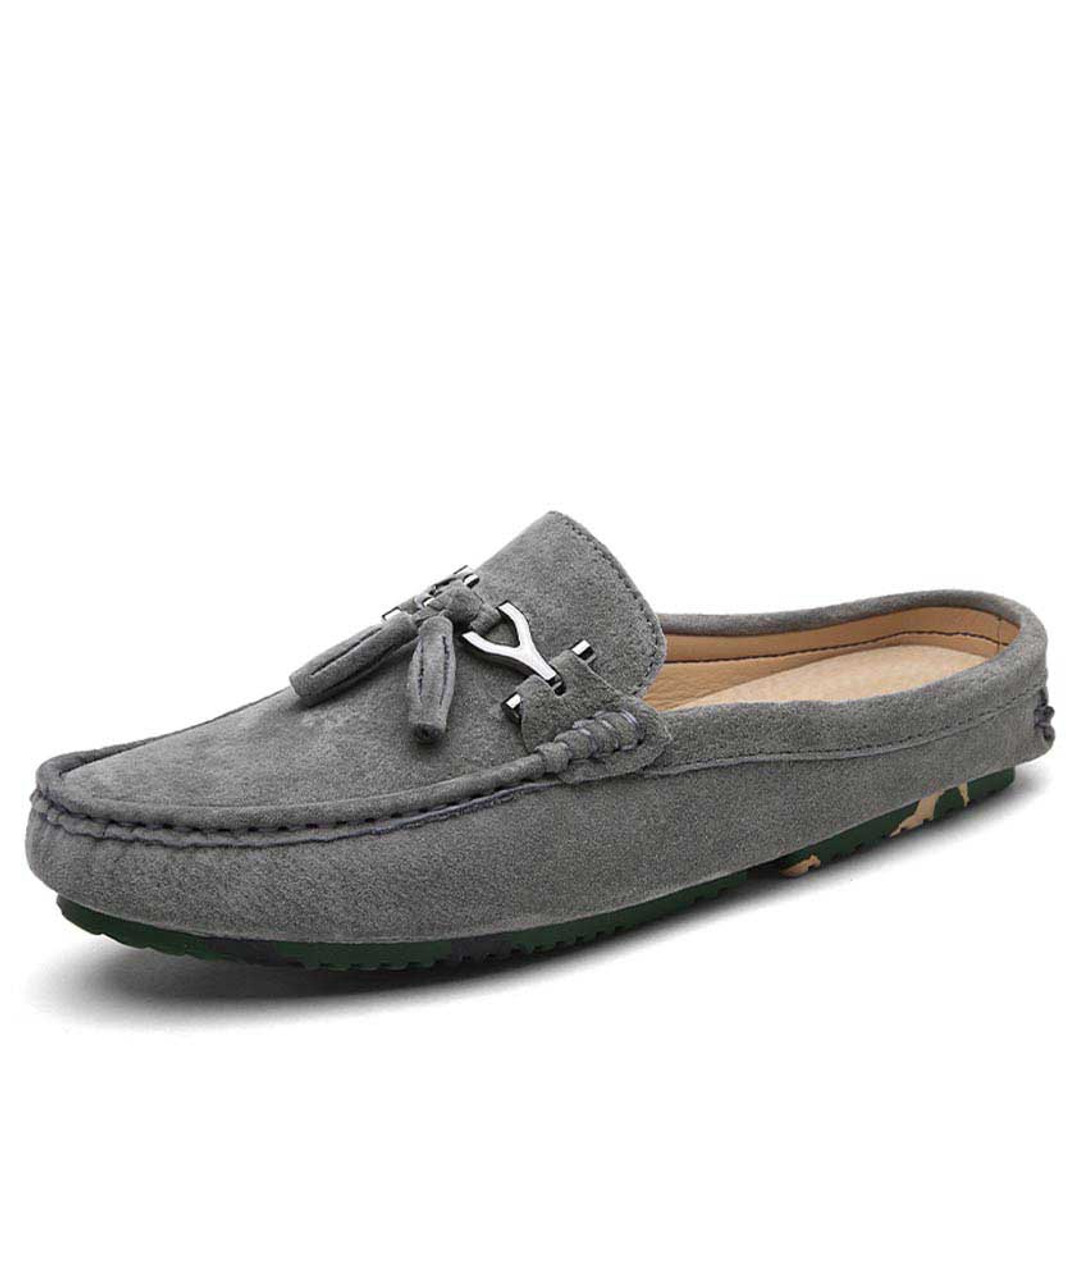 grey slip on loafers